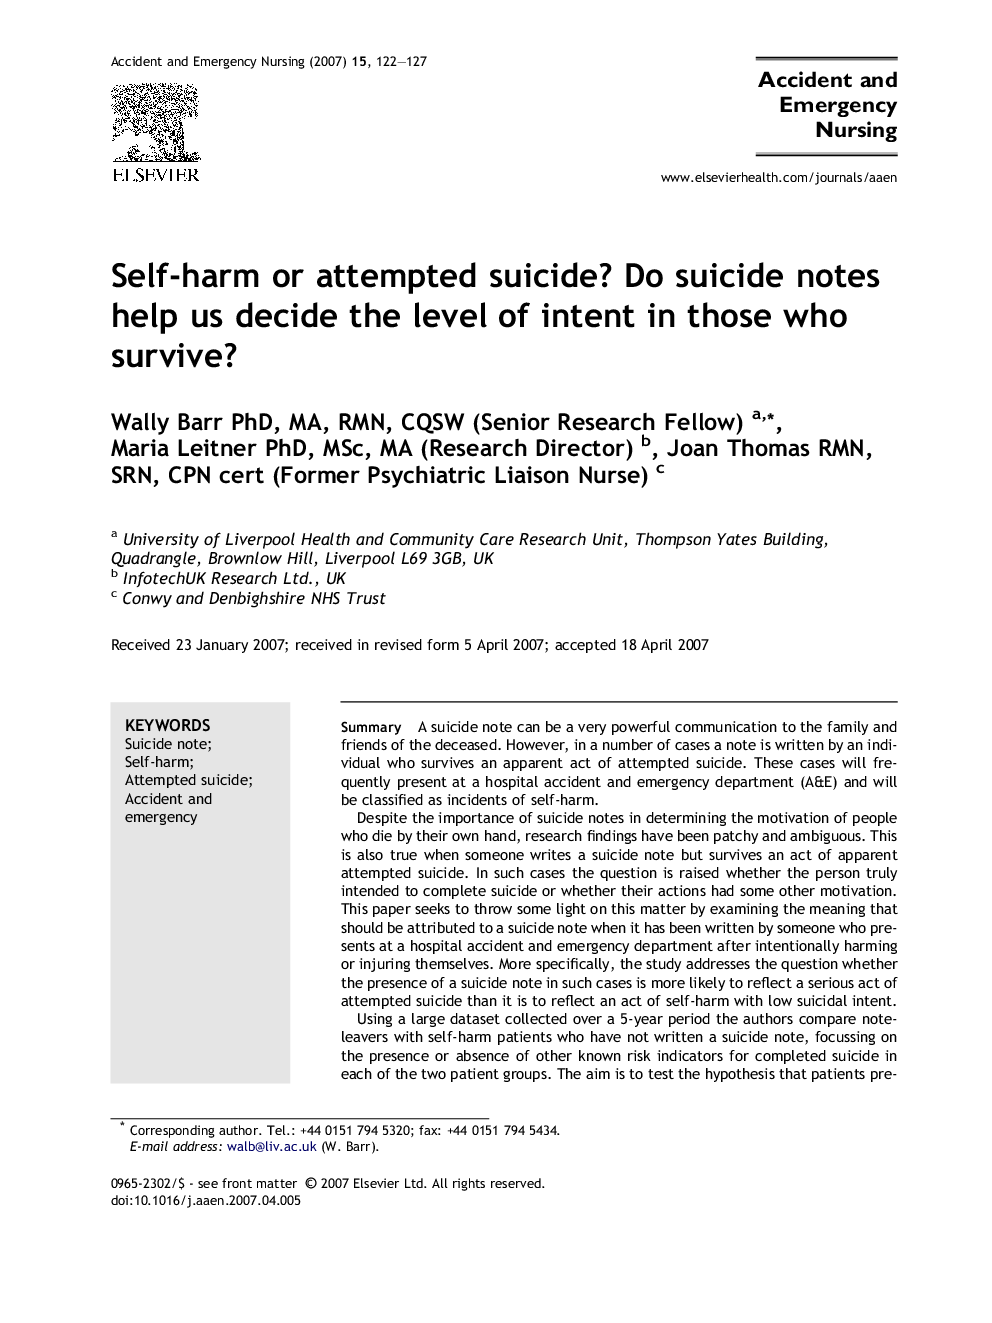 Self-harm or attempted suicide? Do suicide notes help us decide the level of intent in those who survive?